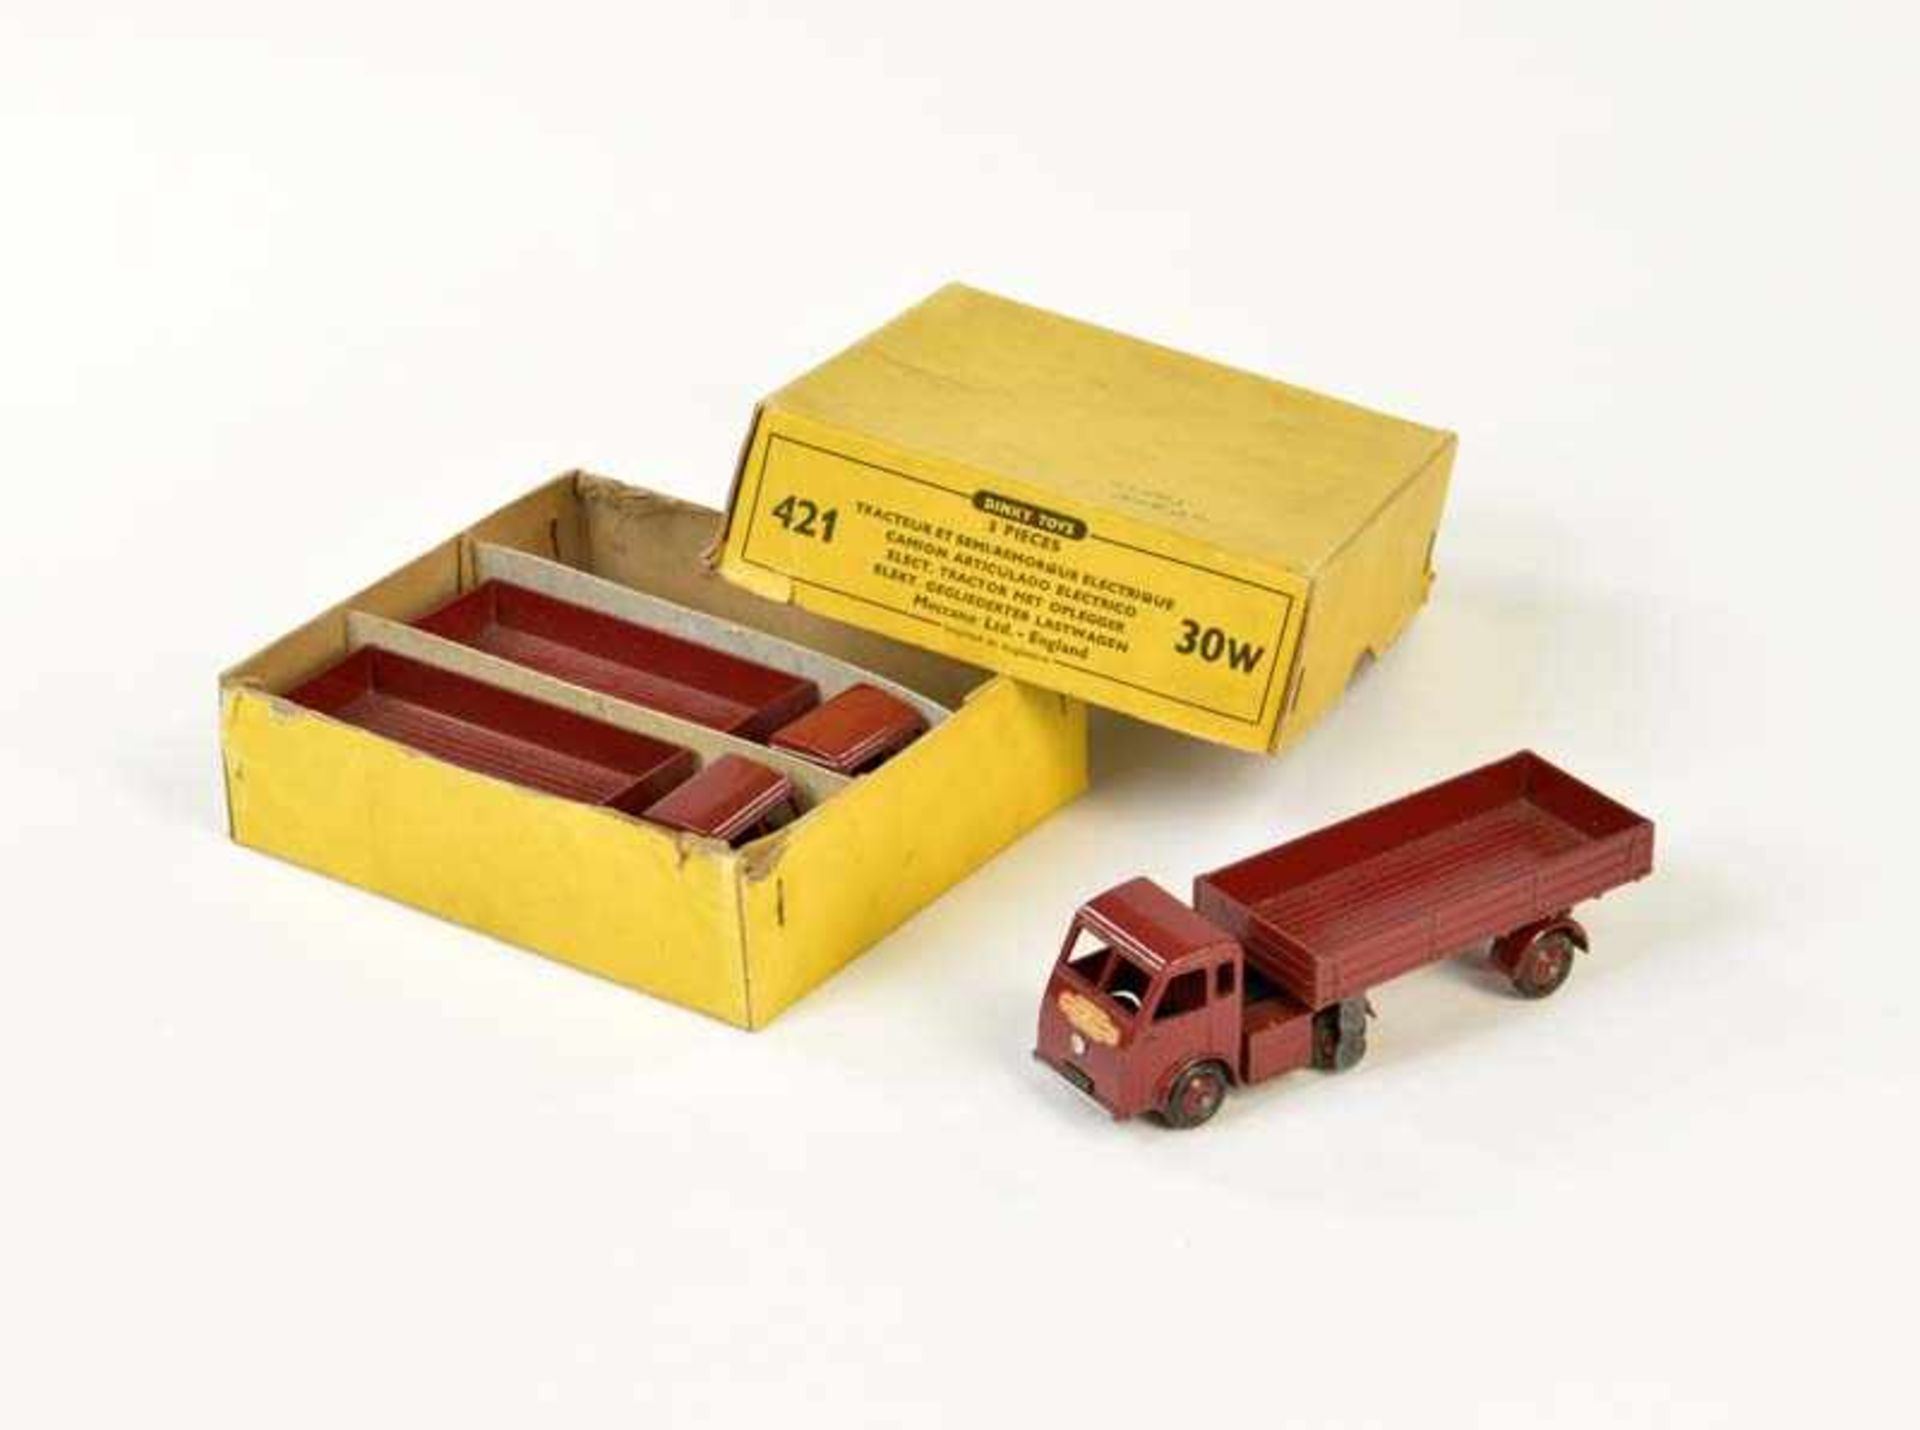 Dinky Toys, Trader's Box 3 trucks 30W, England, 1:43, diecast, min. paint d., C 1-2Dinky Toys,